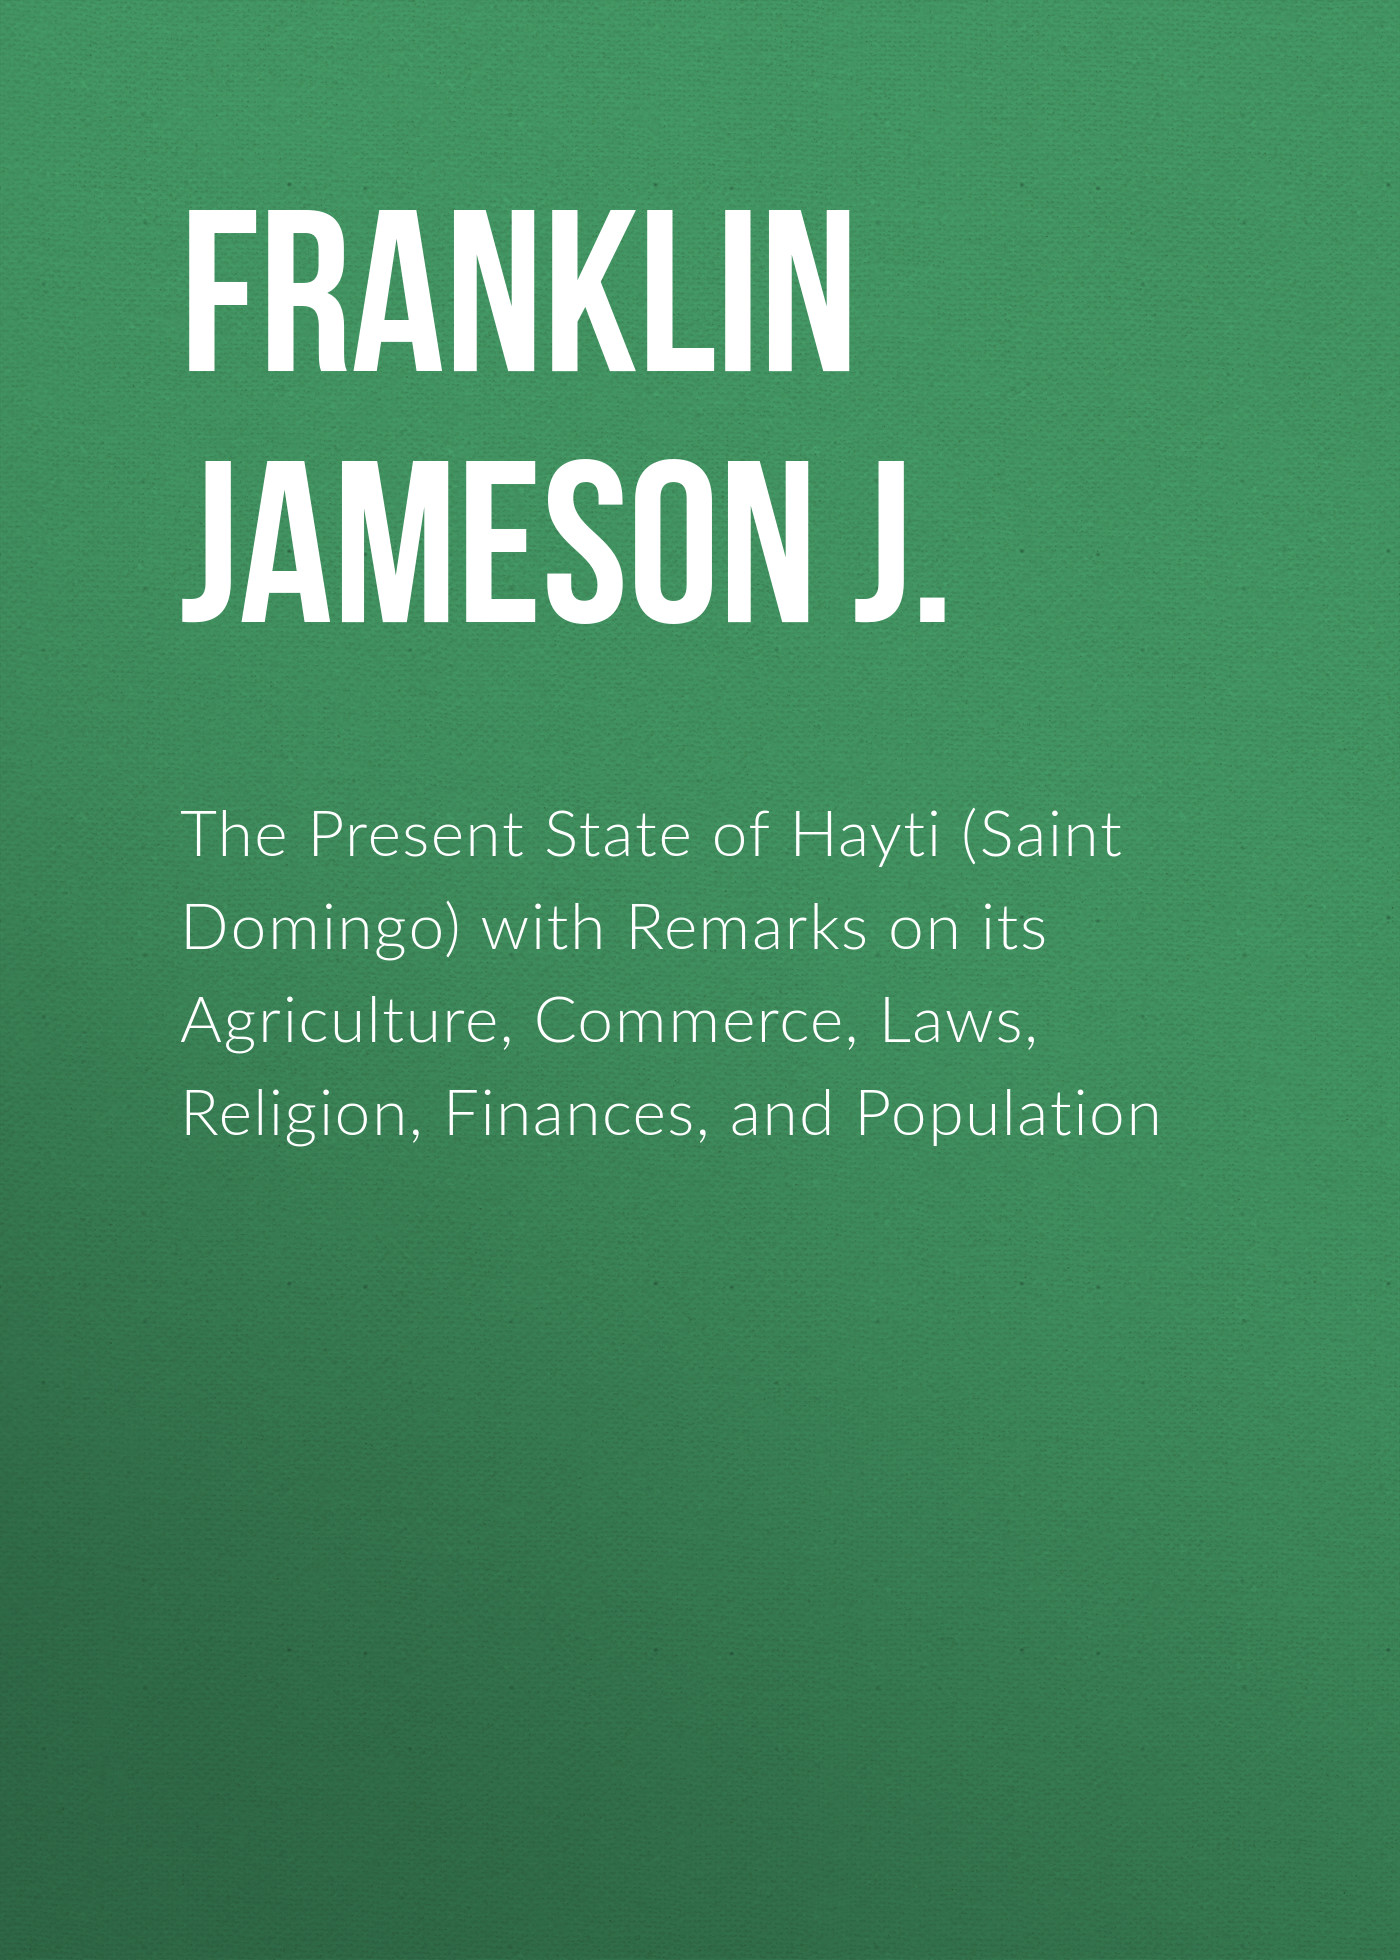 The Present State of Hayti (Saint Domingo) with Remarks on its Agriculture, Commerce, Laws, Religion, Finances, and Population